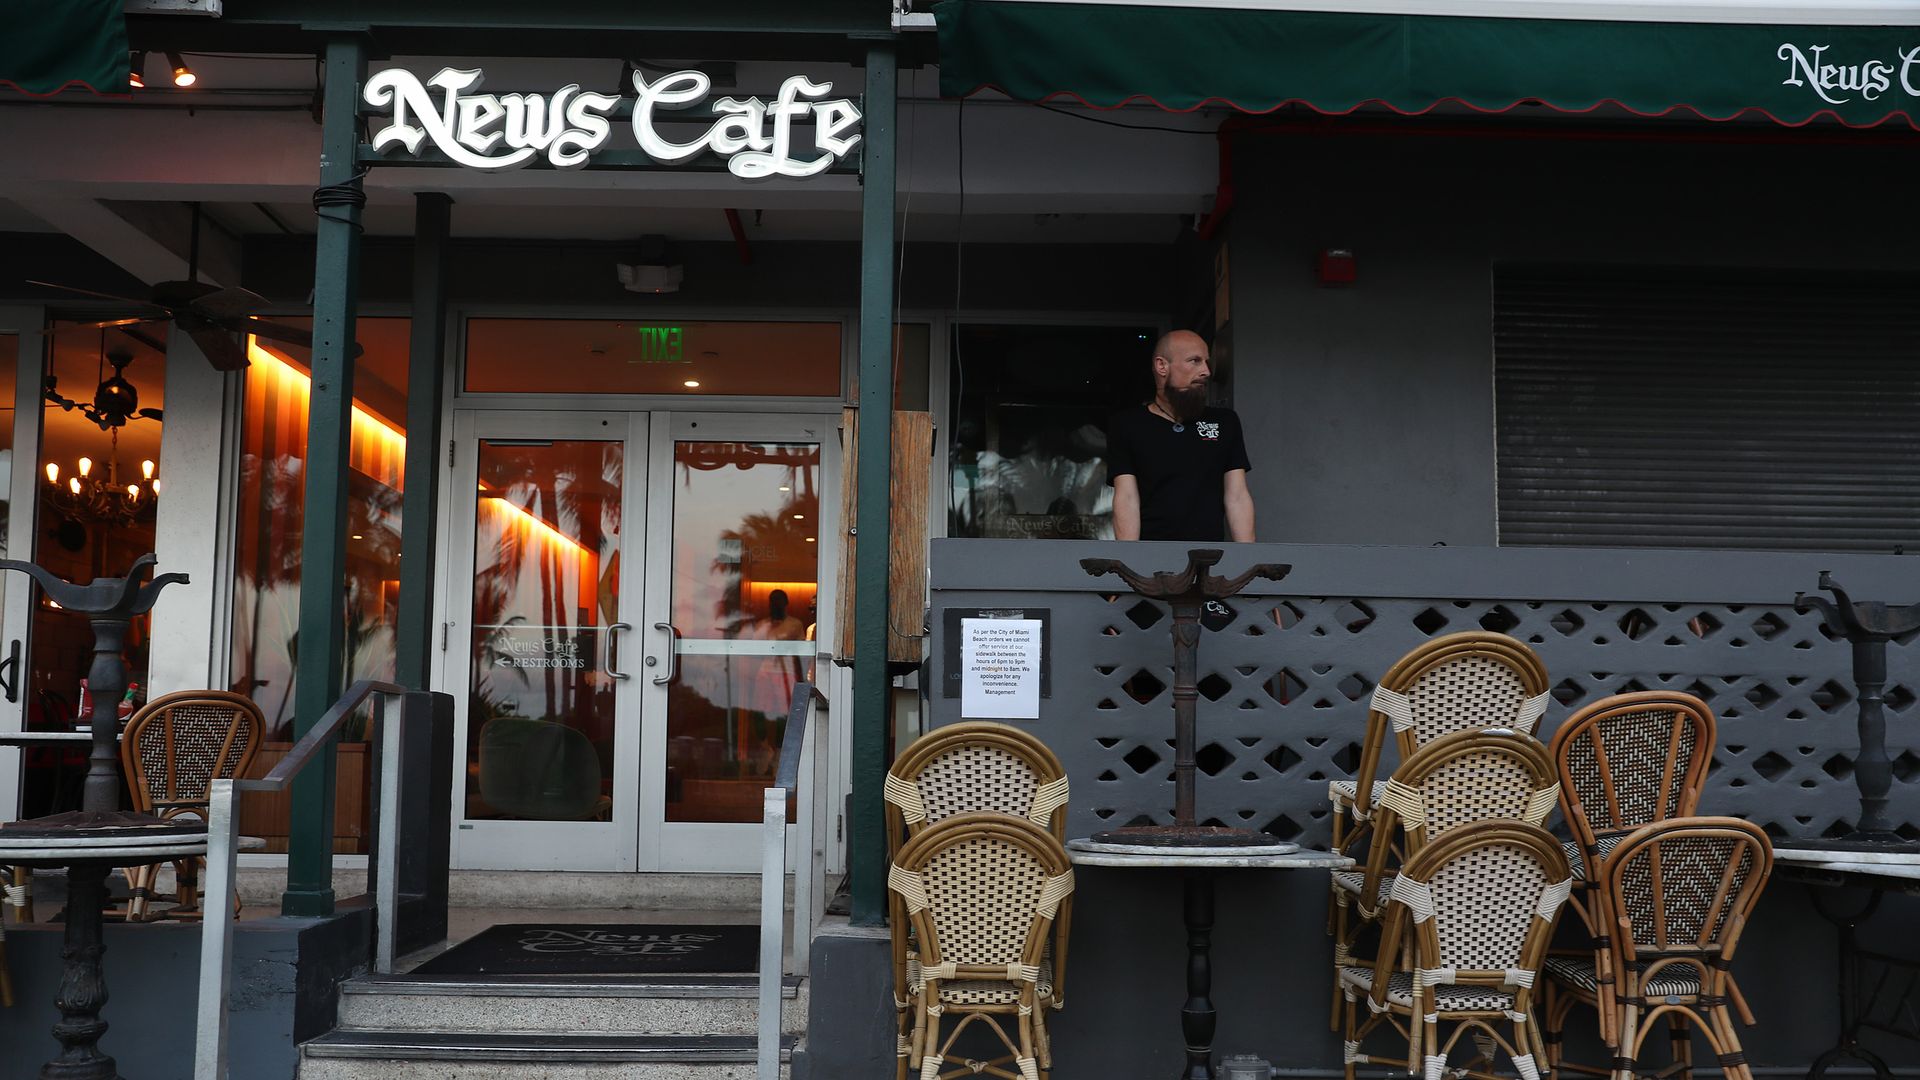 An employee of News Cafe waits outside for customers during the COVID-19 pandemic.